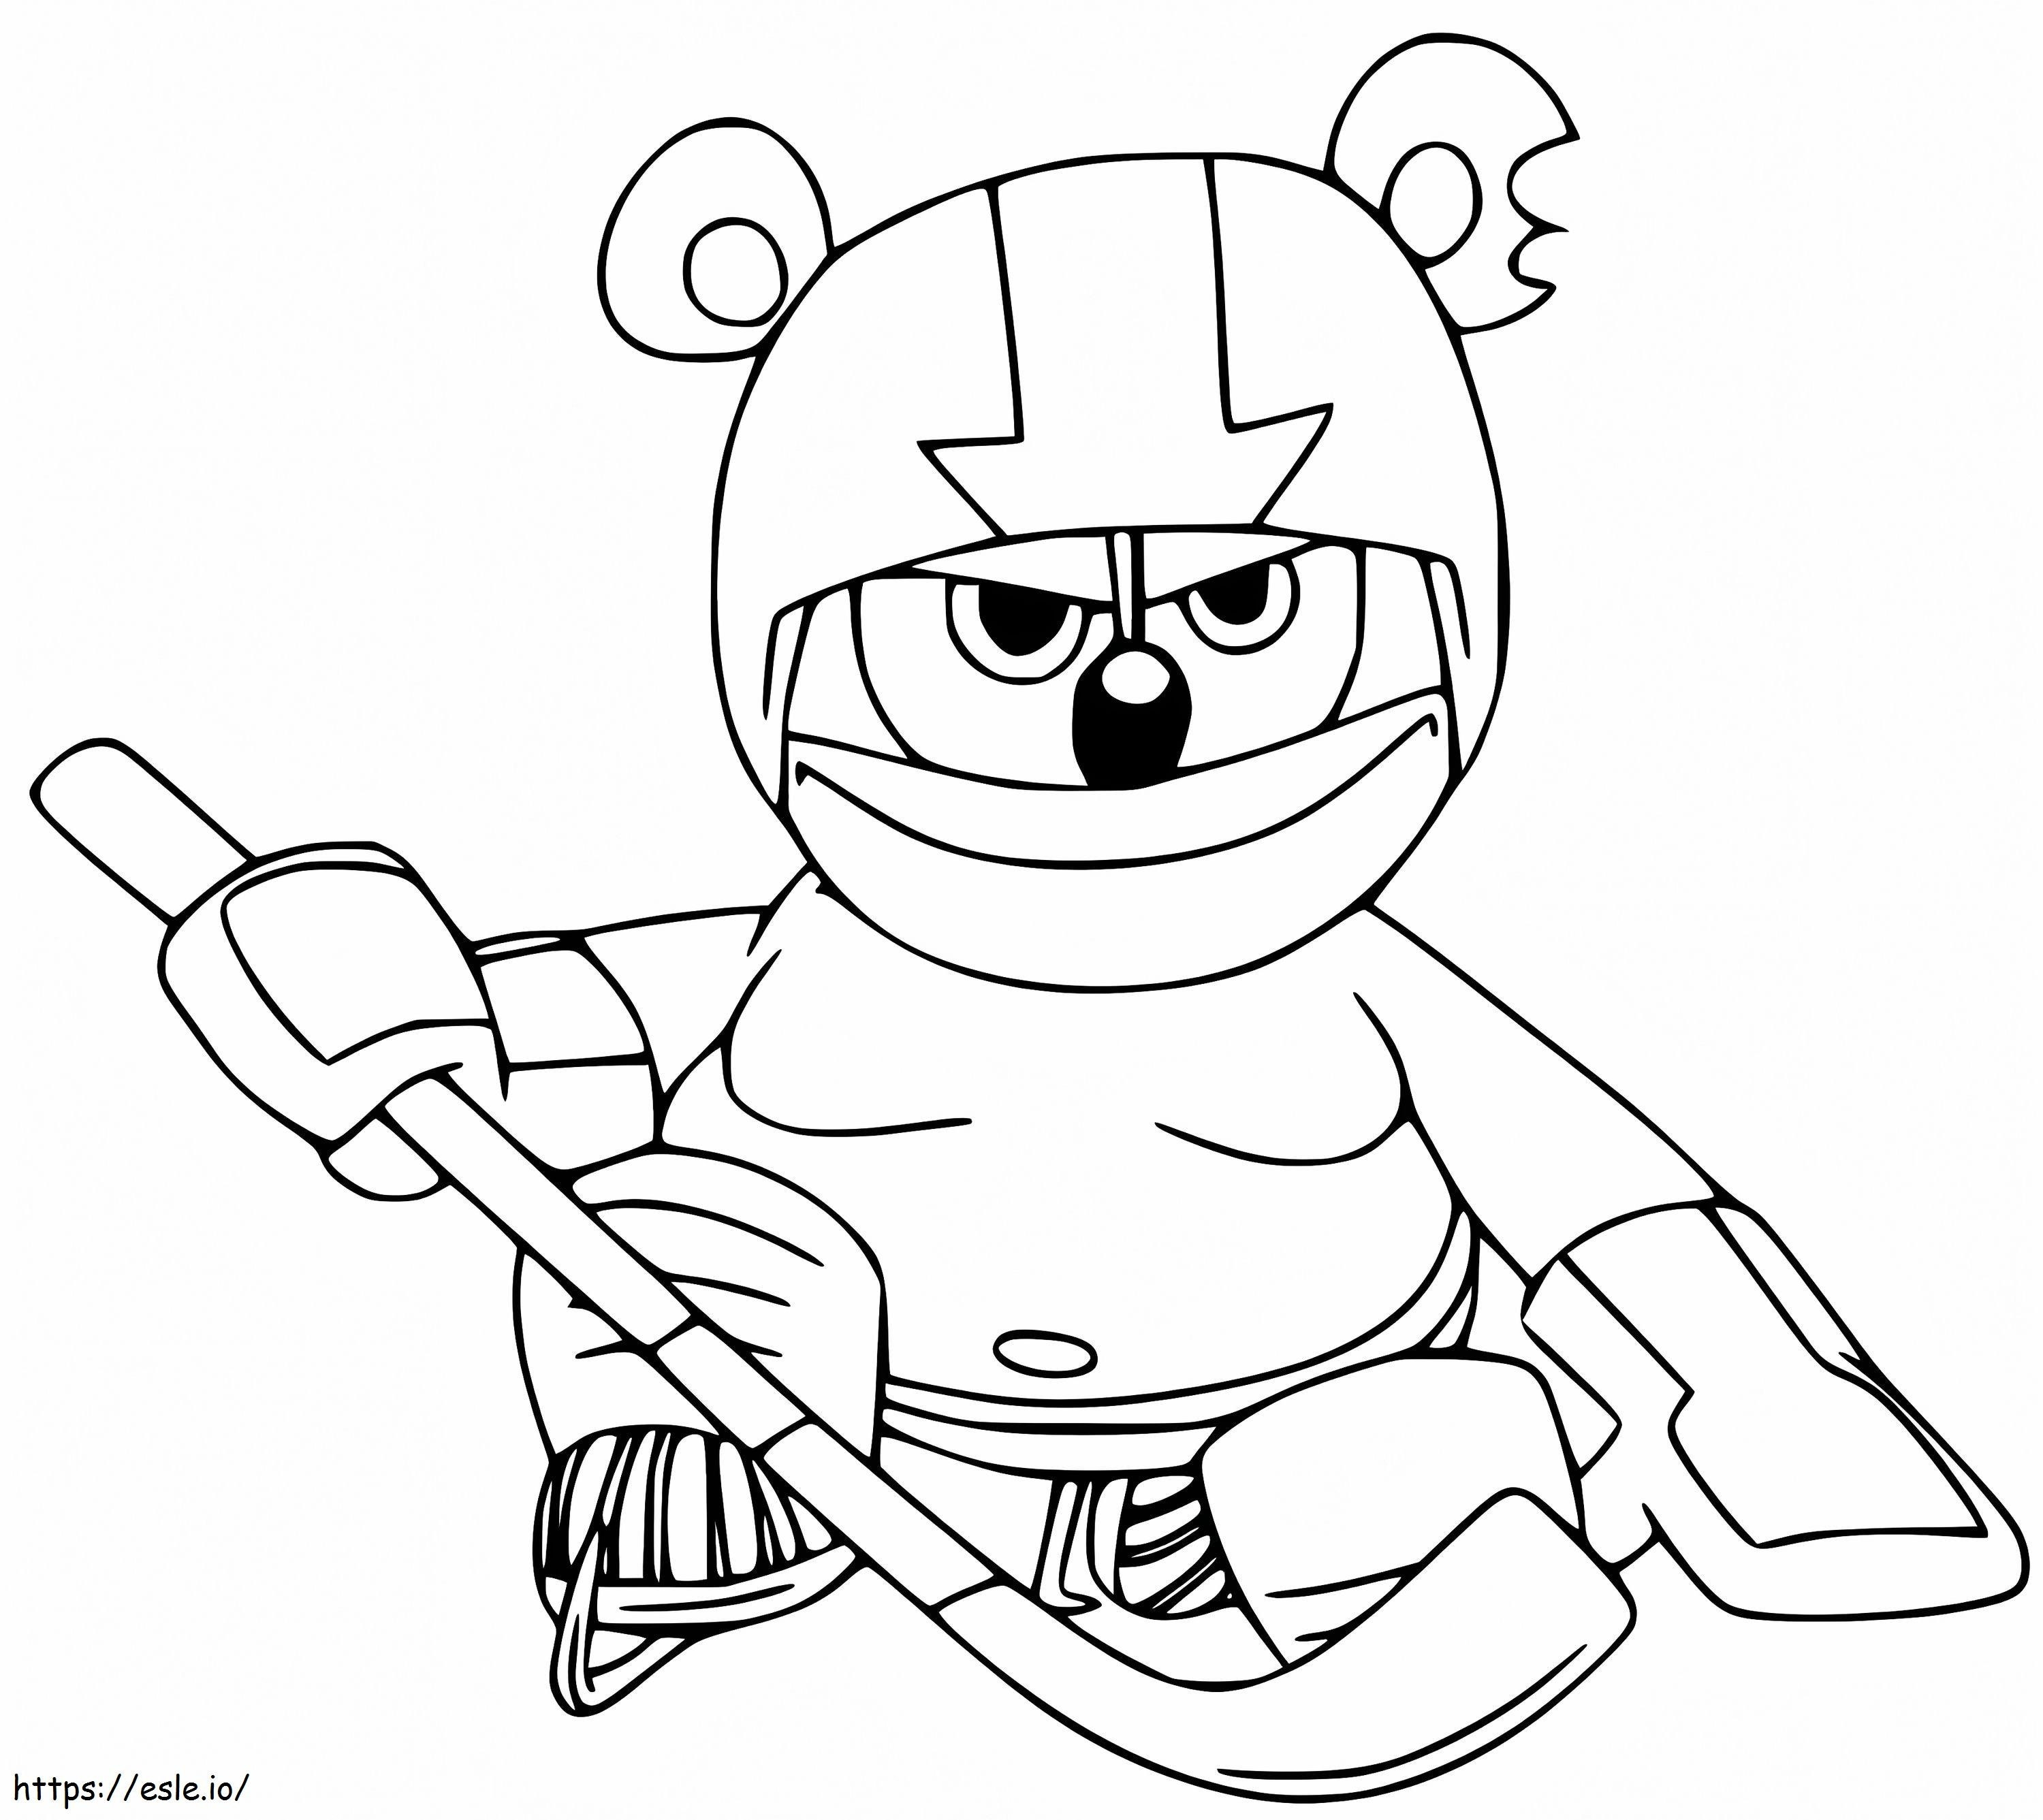 Gummy Bear Playing Hockey coloring page